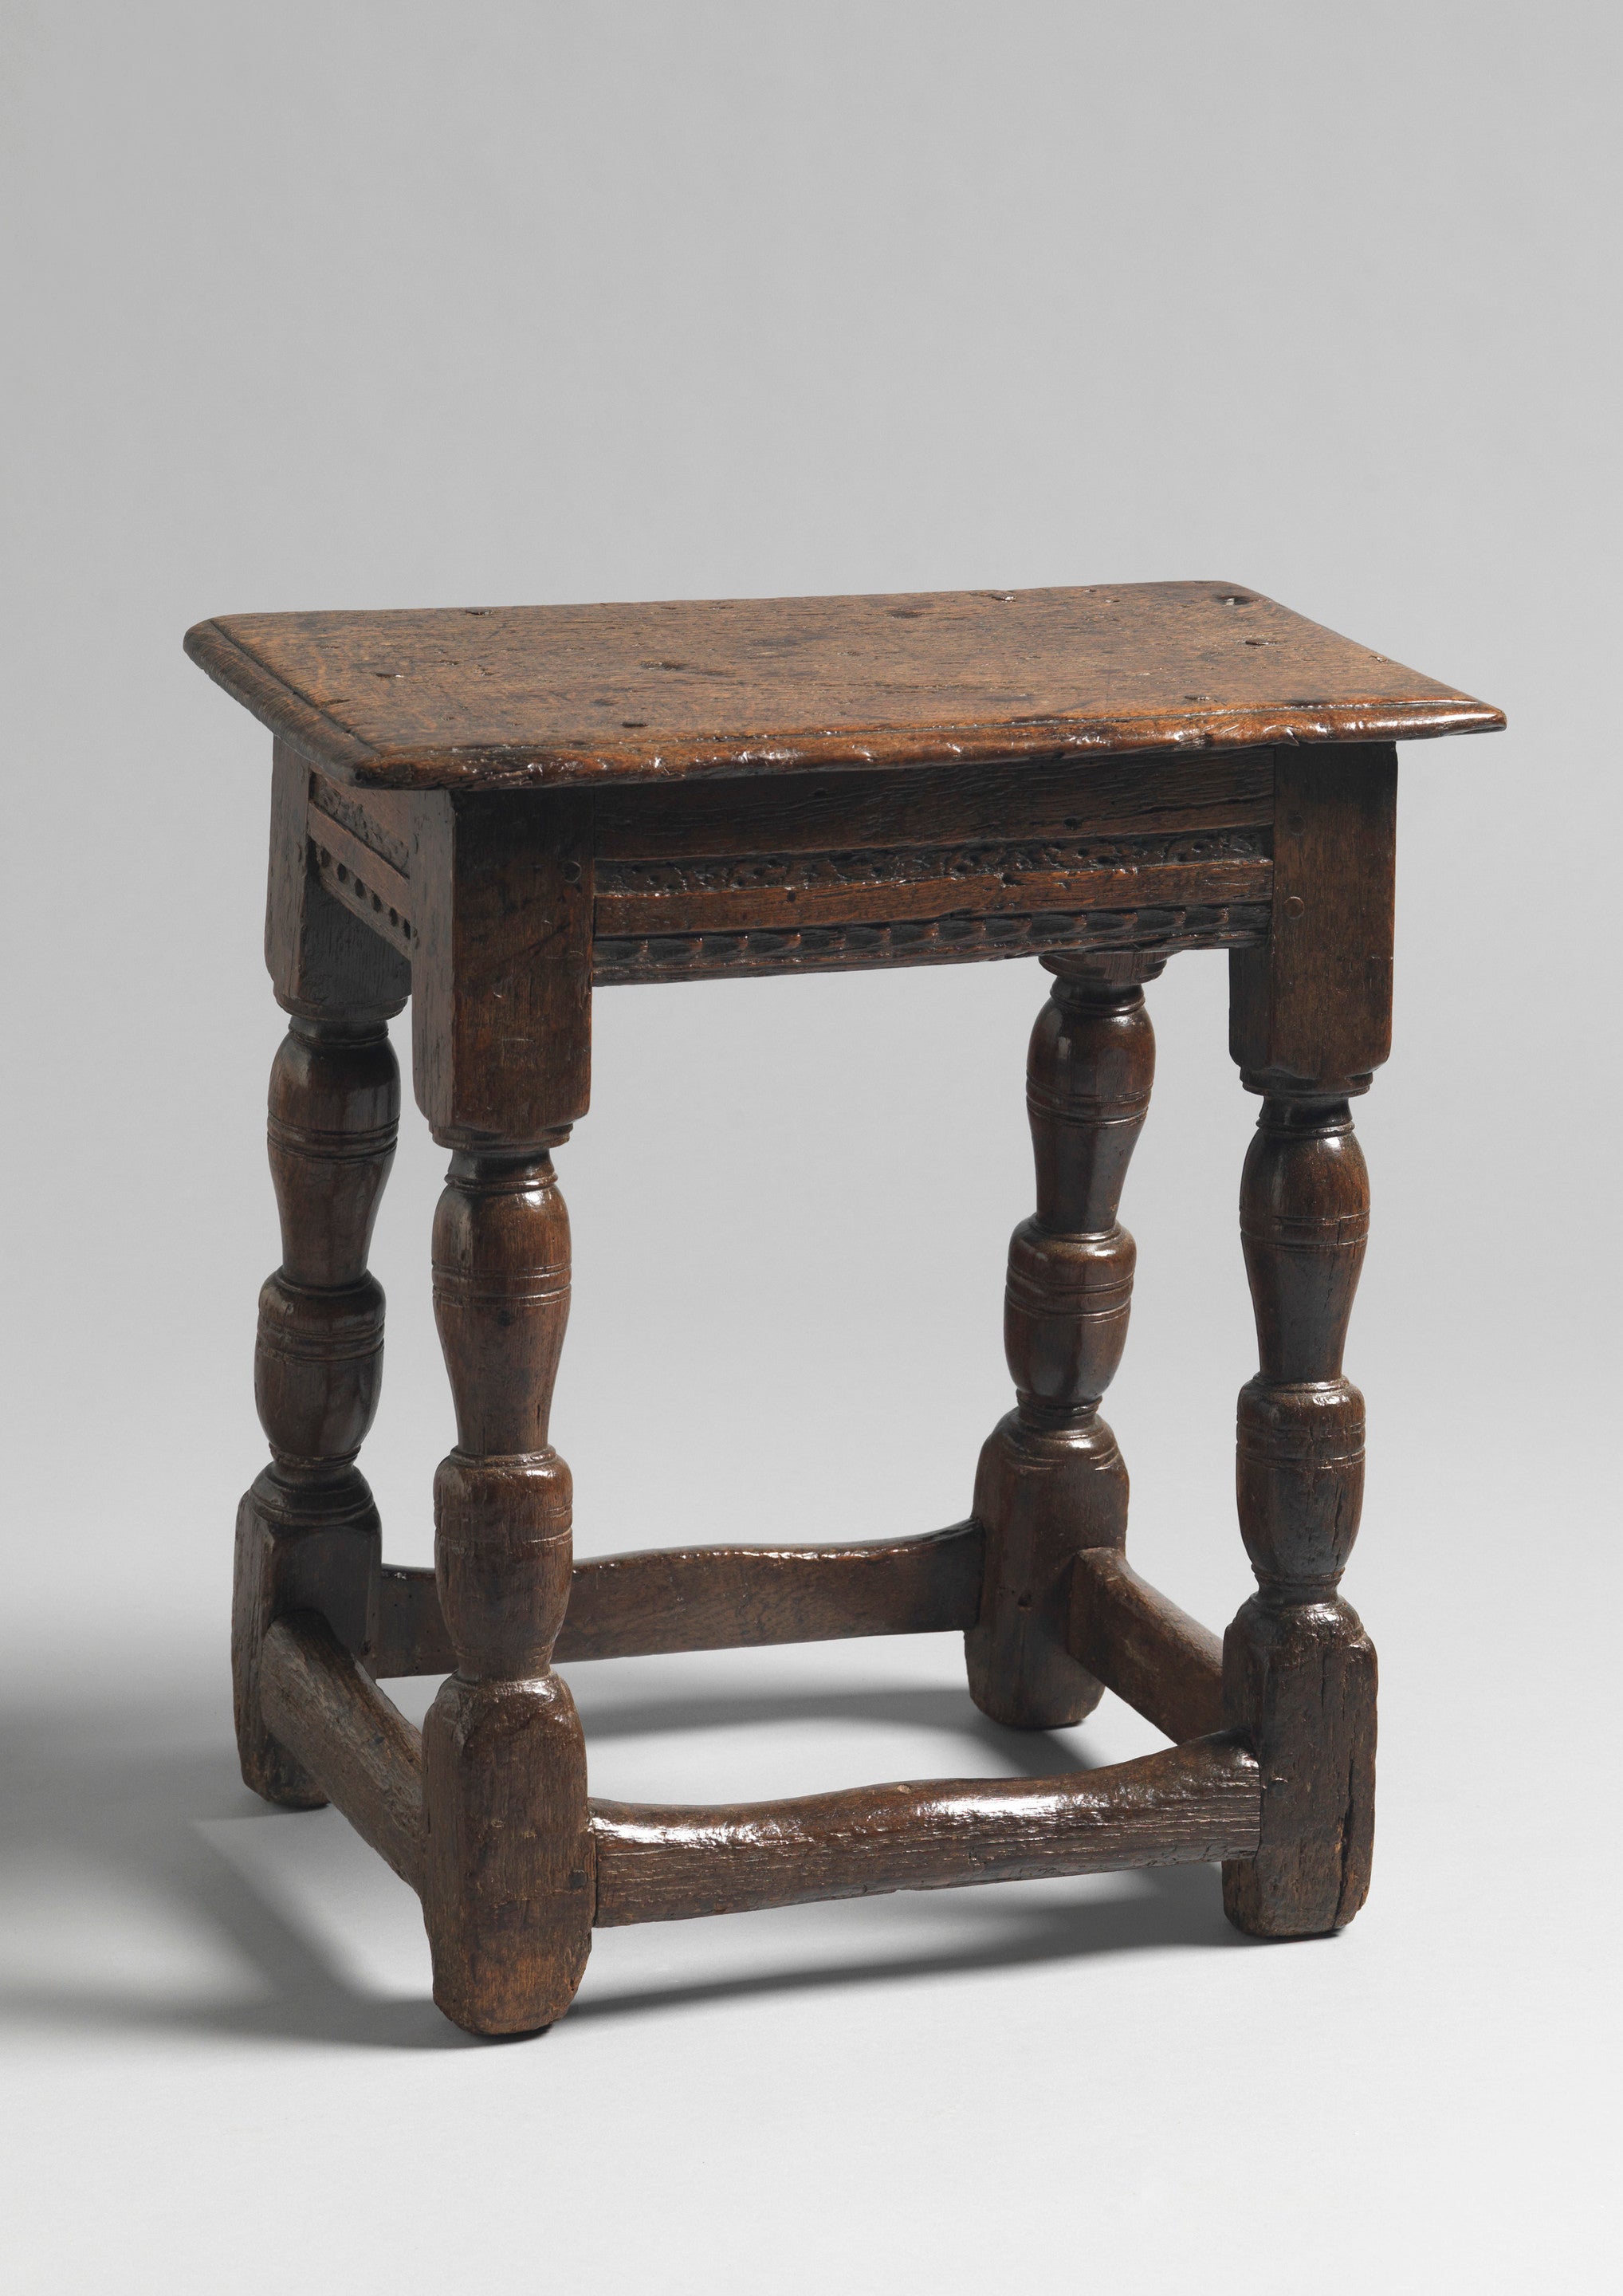 Early Baluster Turned Leg Joint Stool